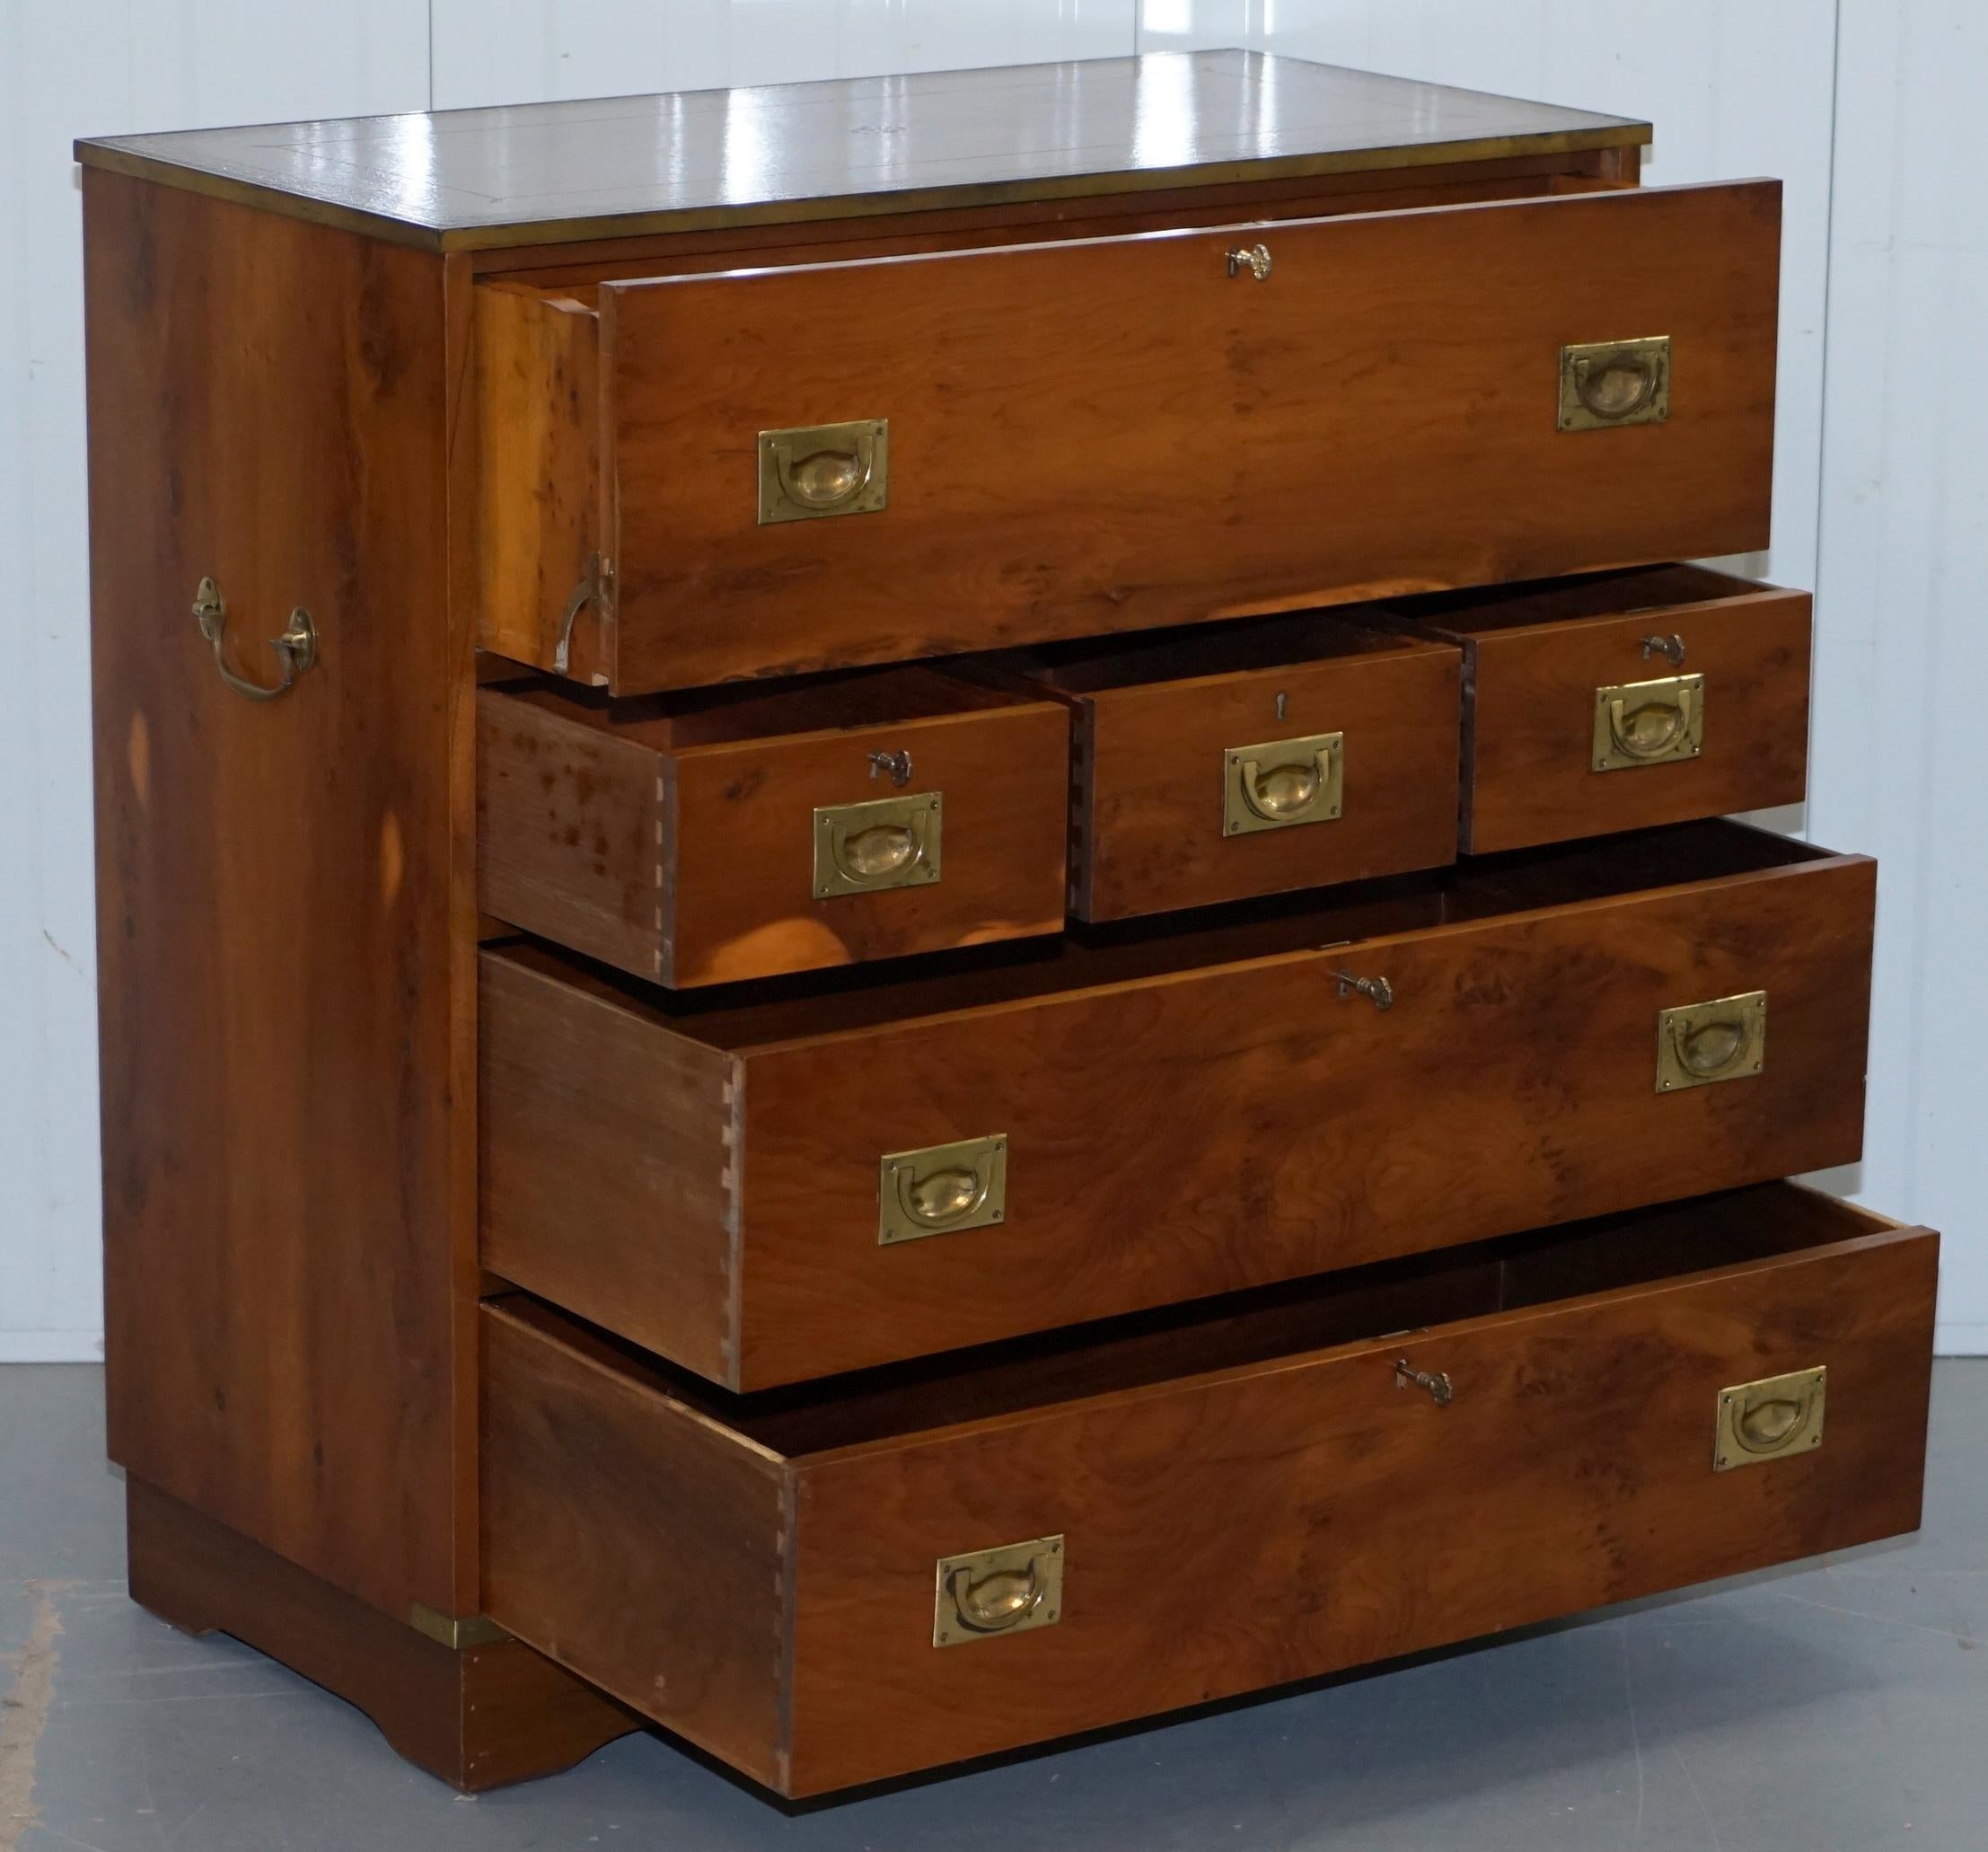 20th Century Yew Wood Leather Top Campaign Chest of Drawers Bureau Built in Desk Secrataire